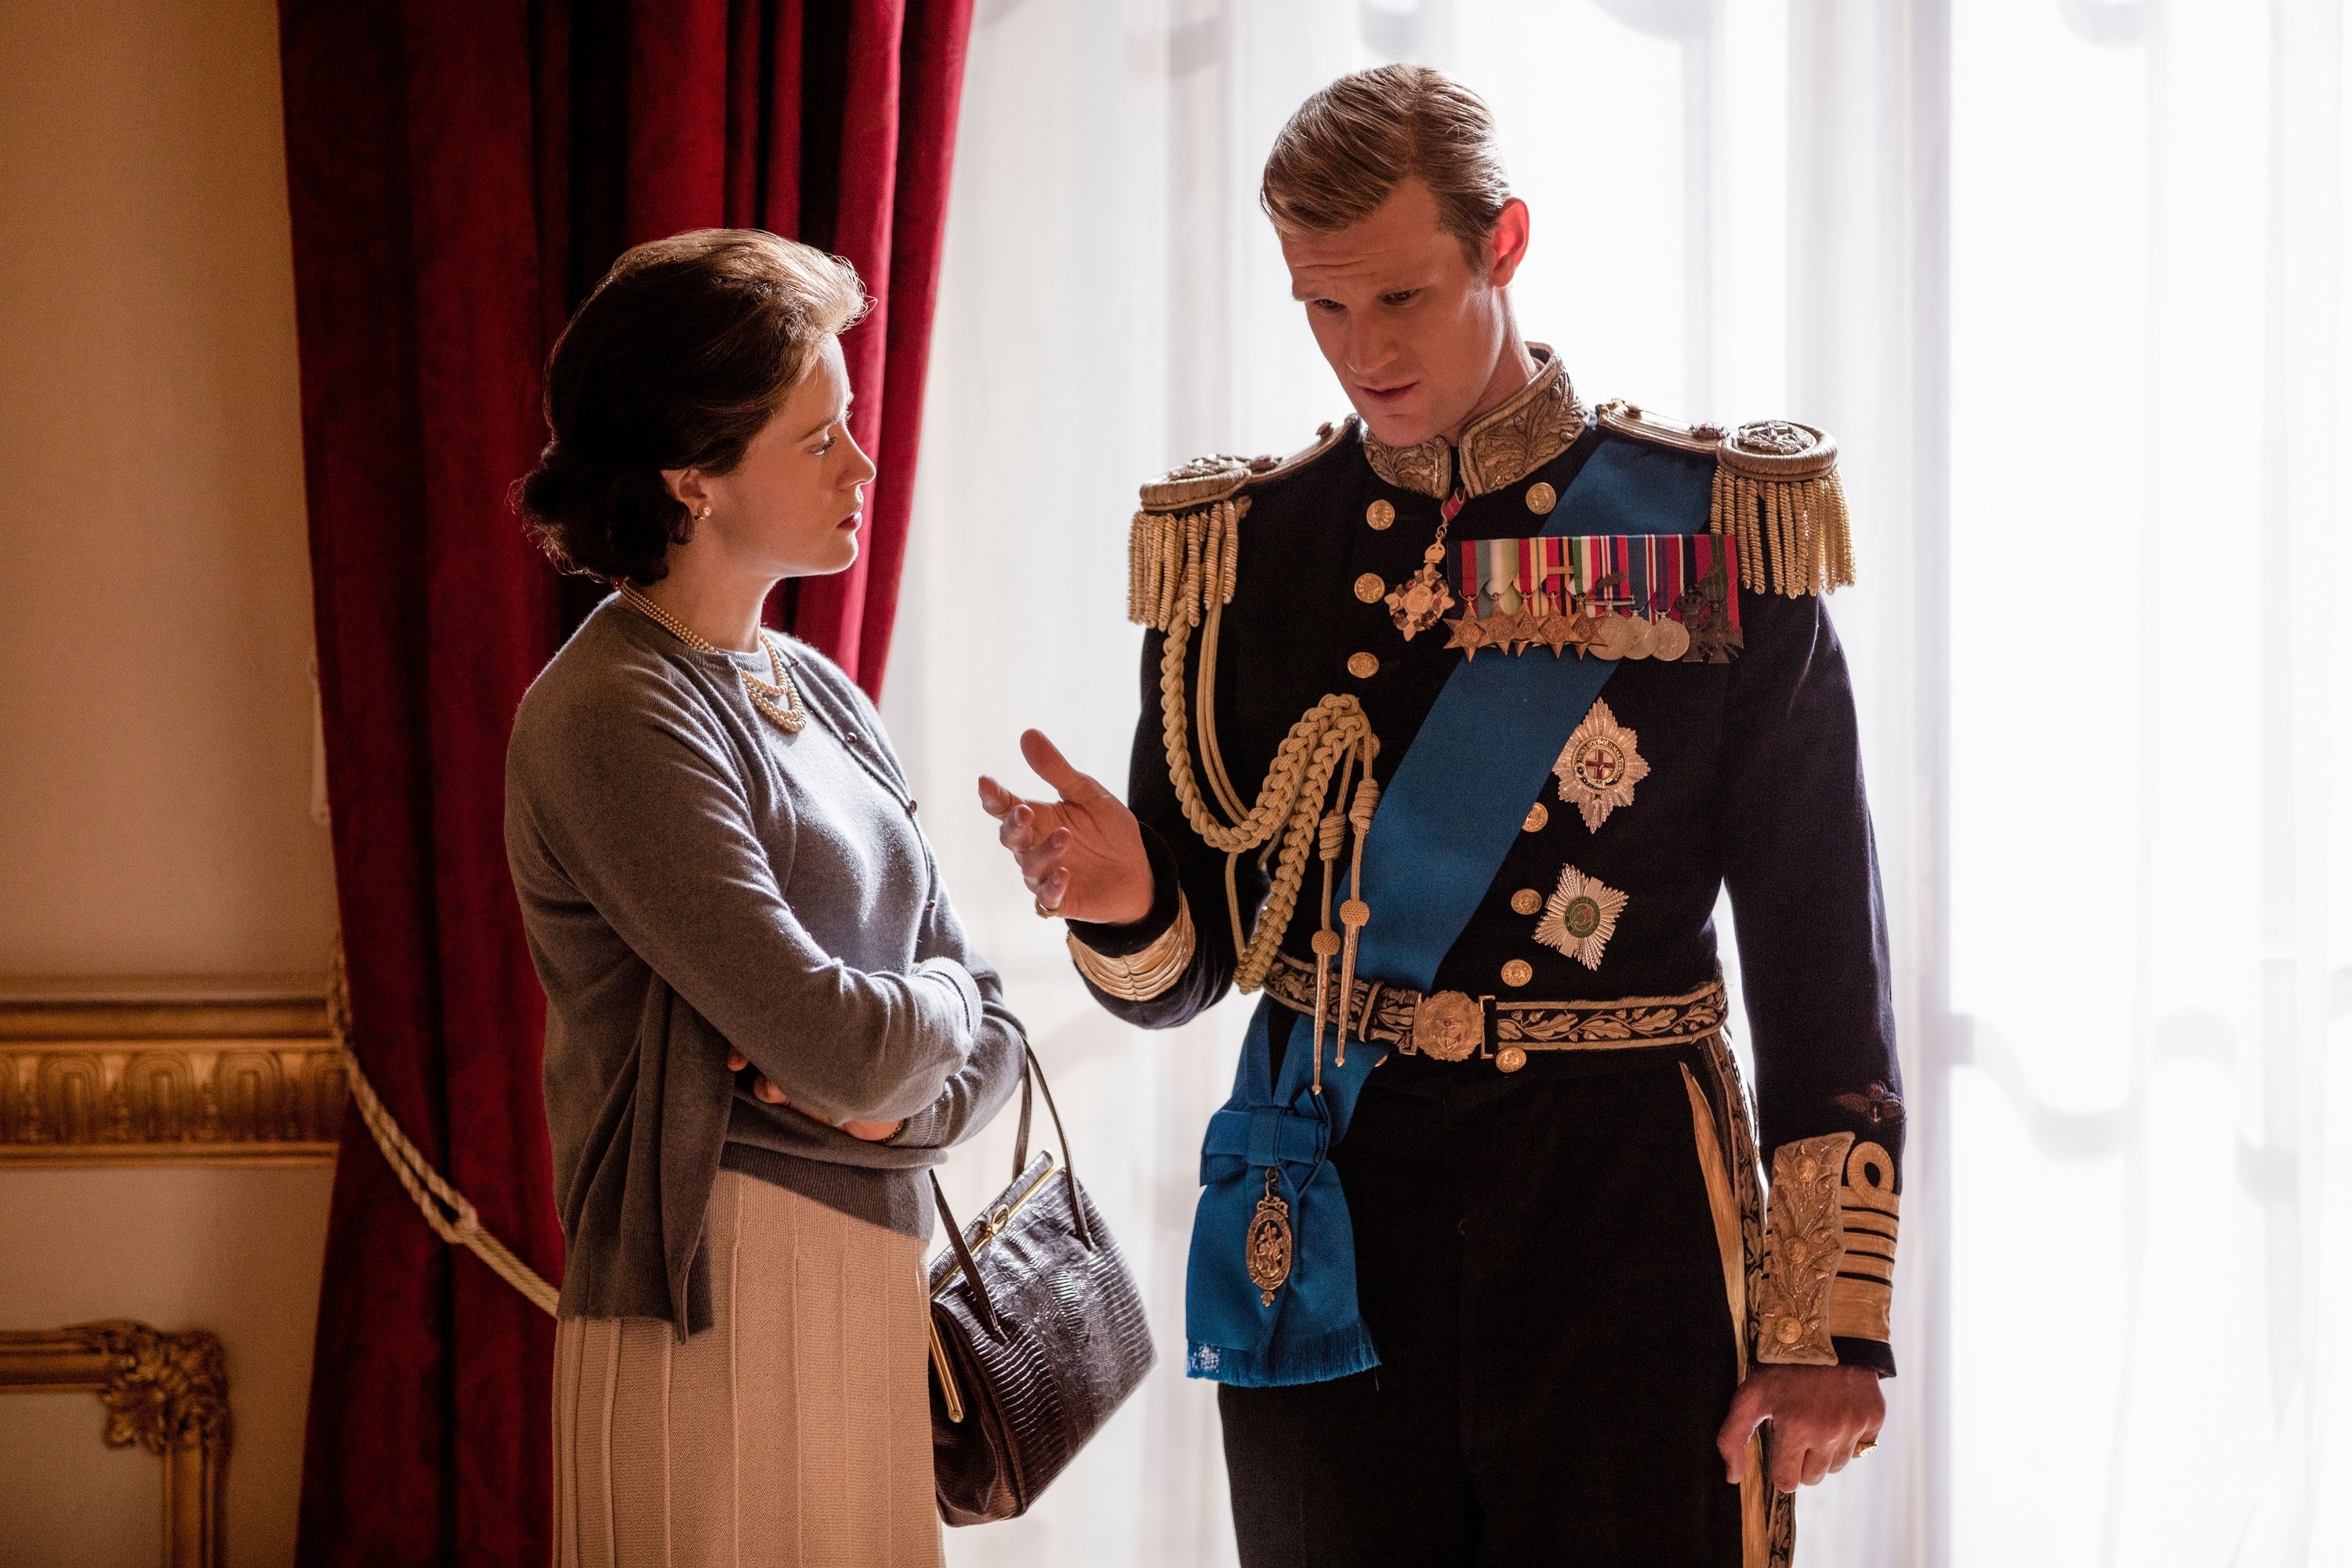 Claire Foy and Matt Smith as the Queen and Prince Philip in an earlier season